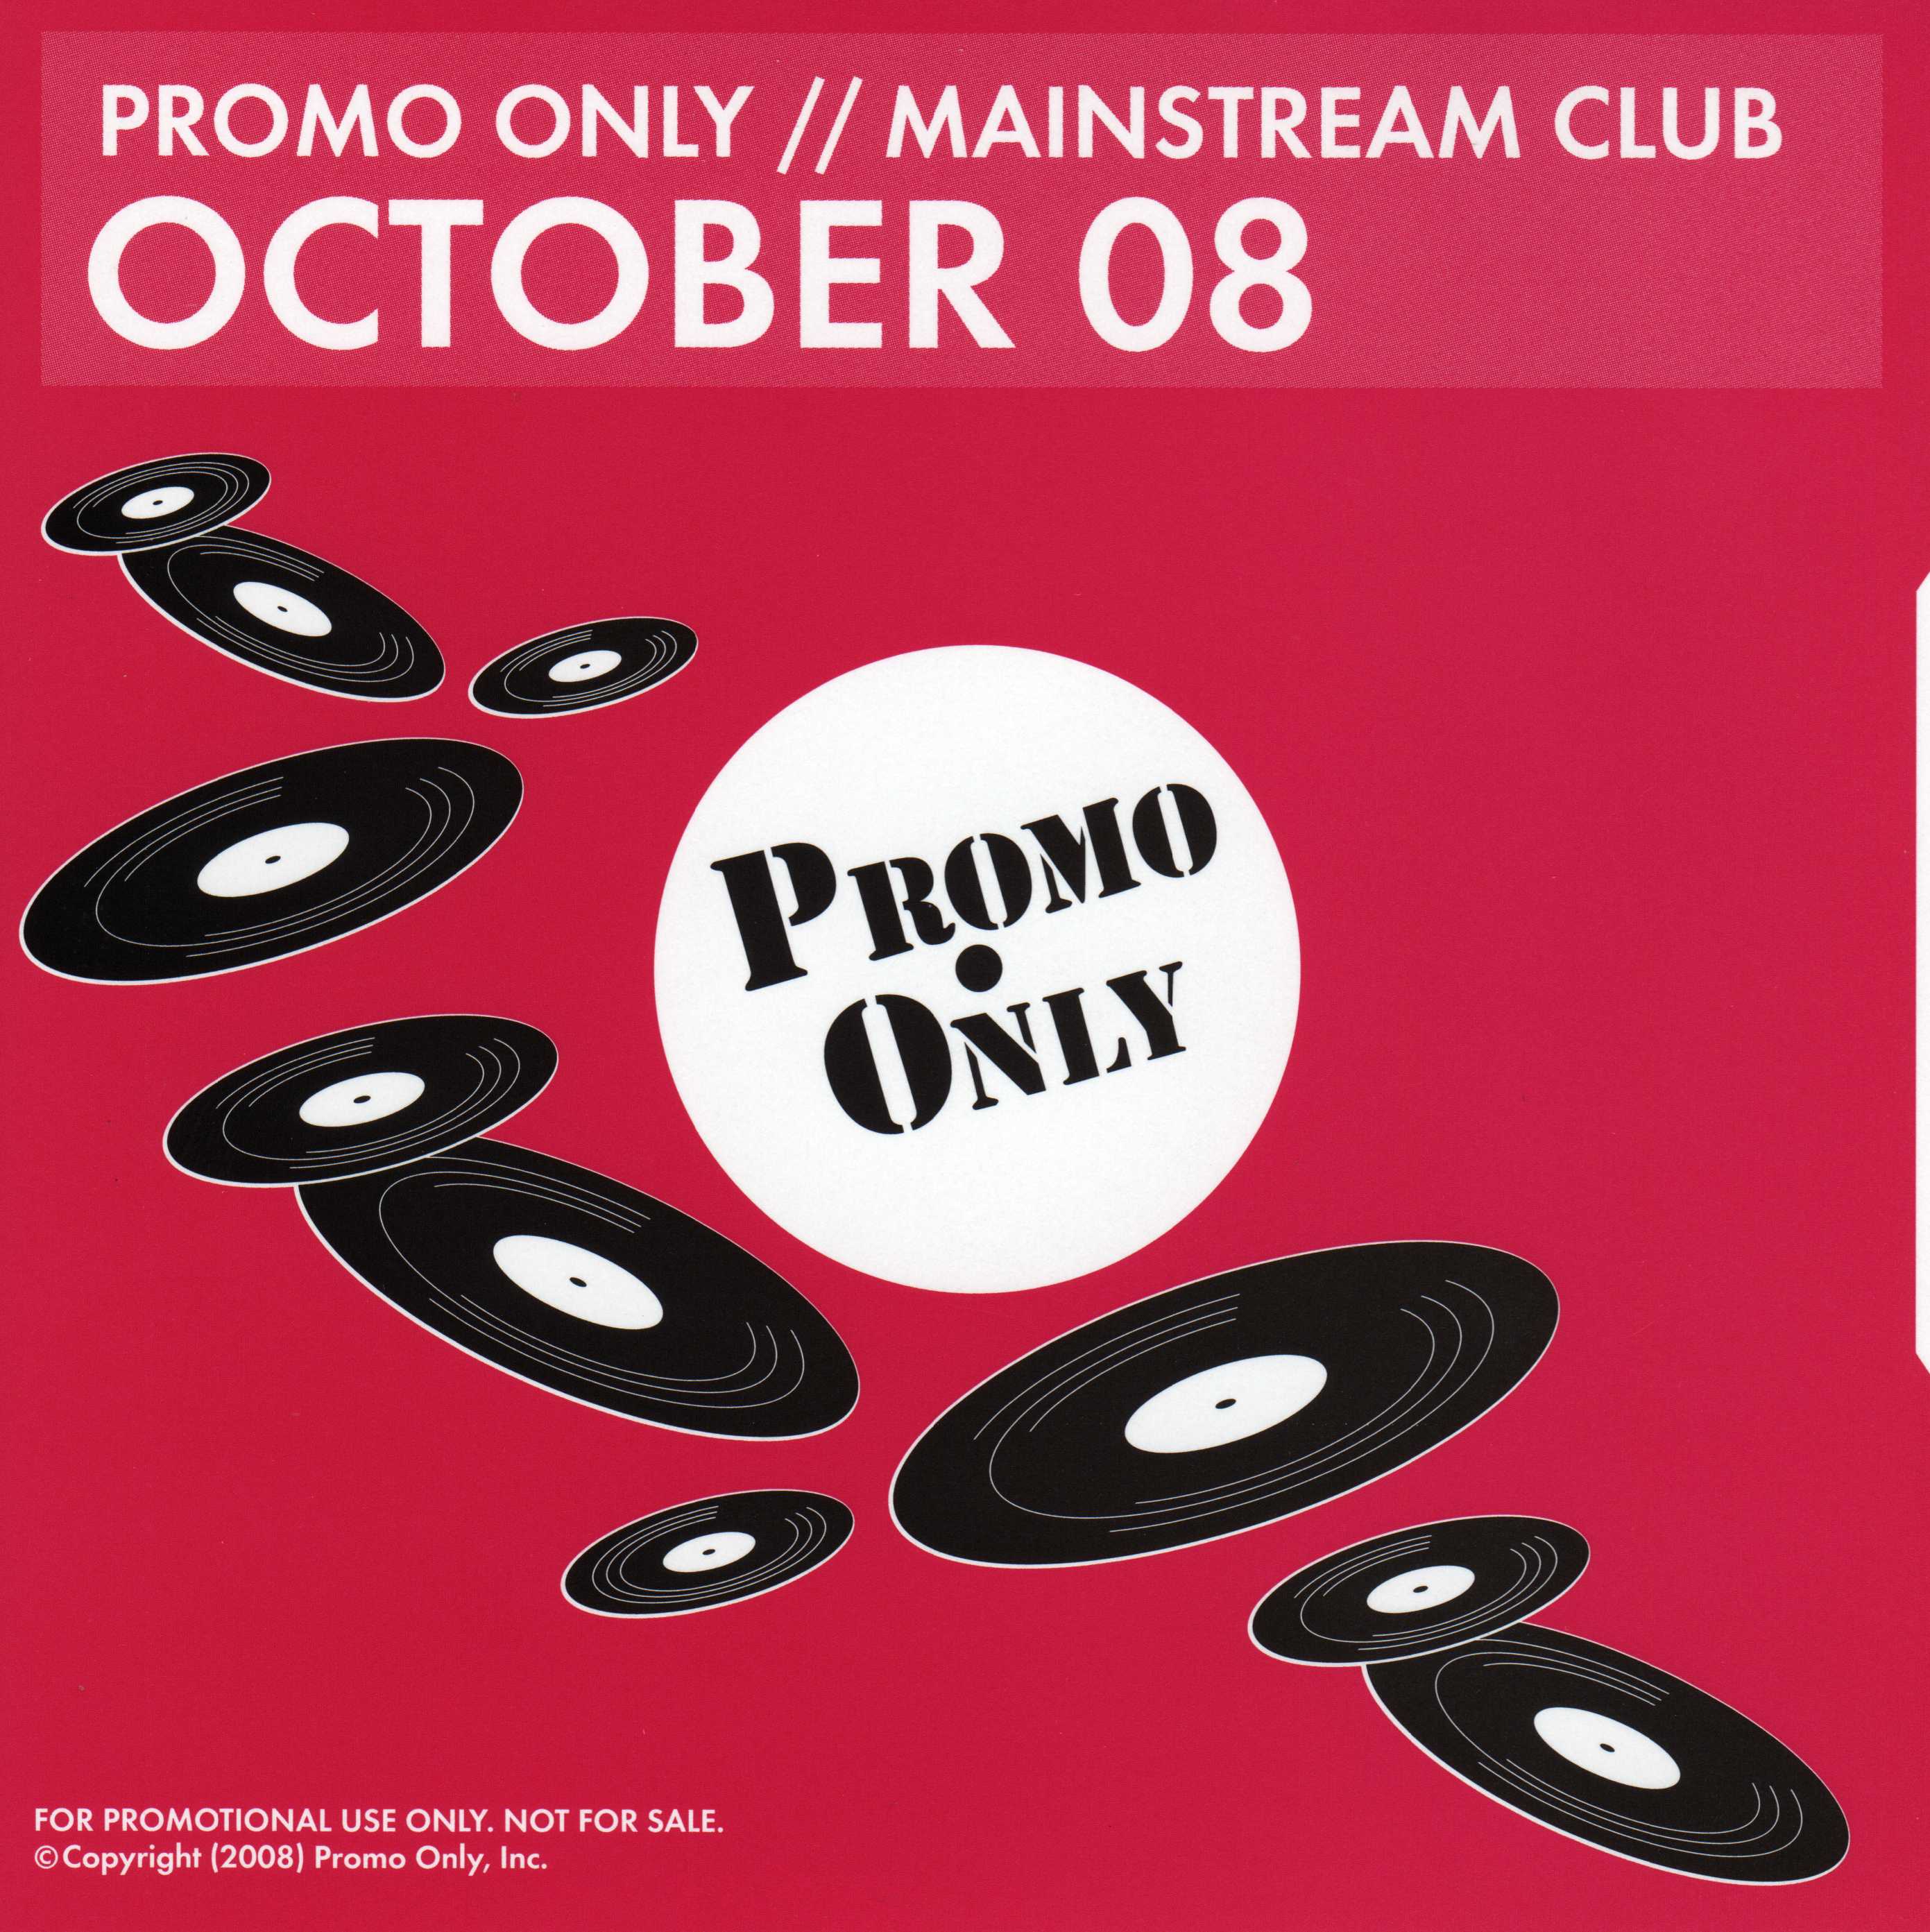 Promo Only: Mainstream Club October 2008